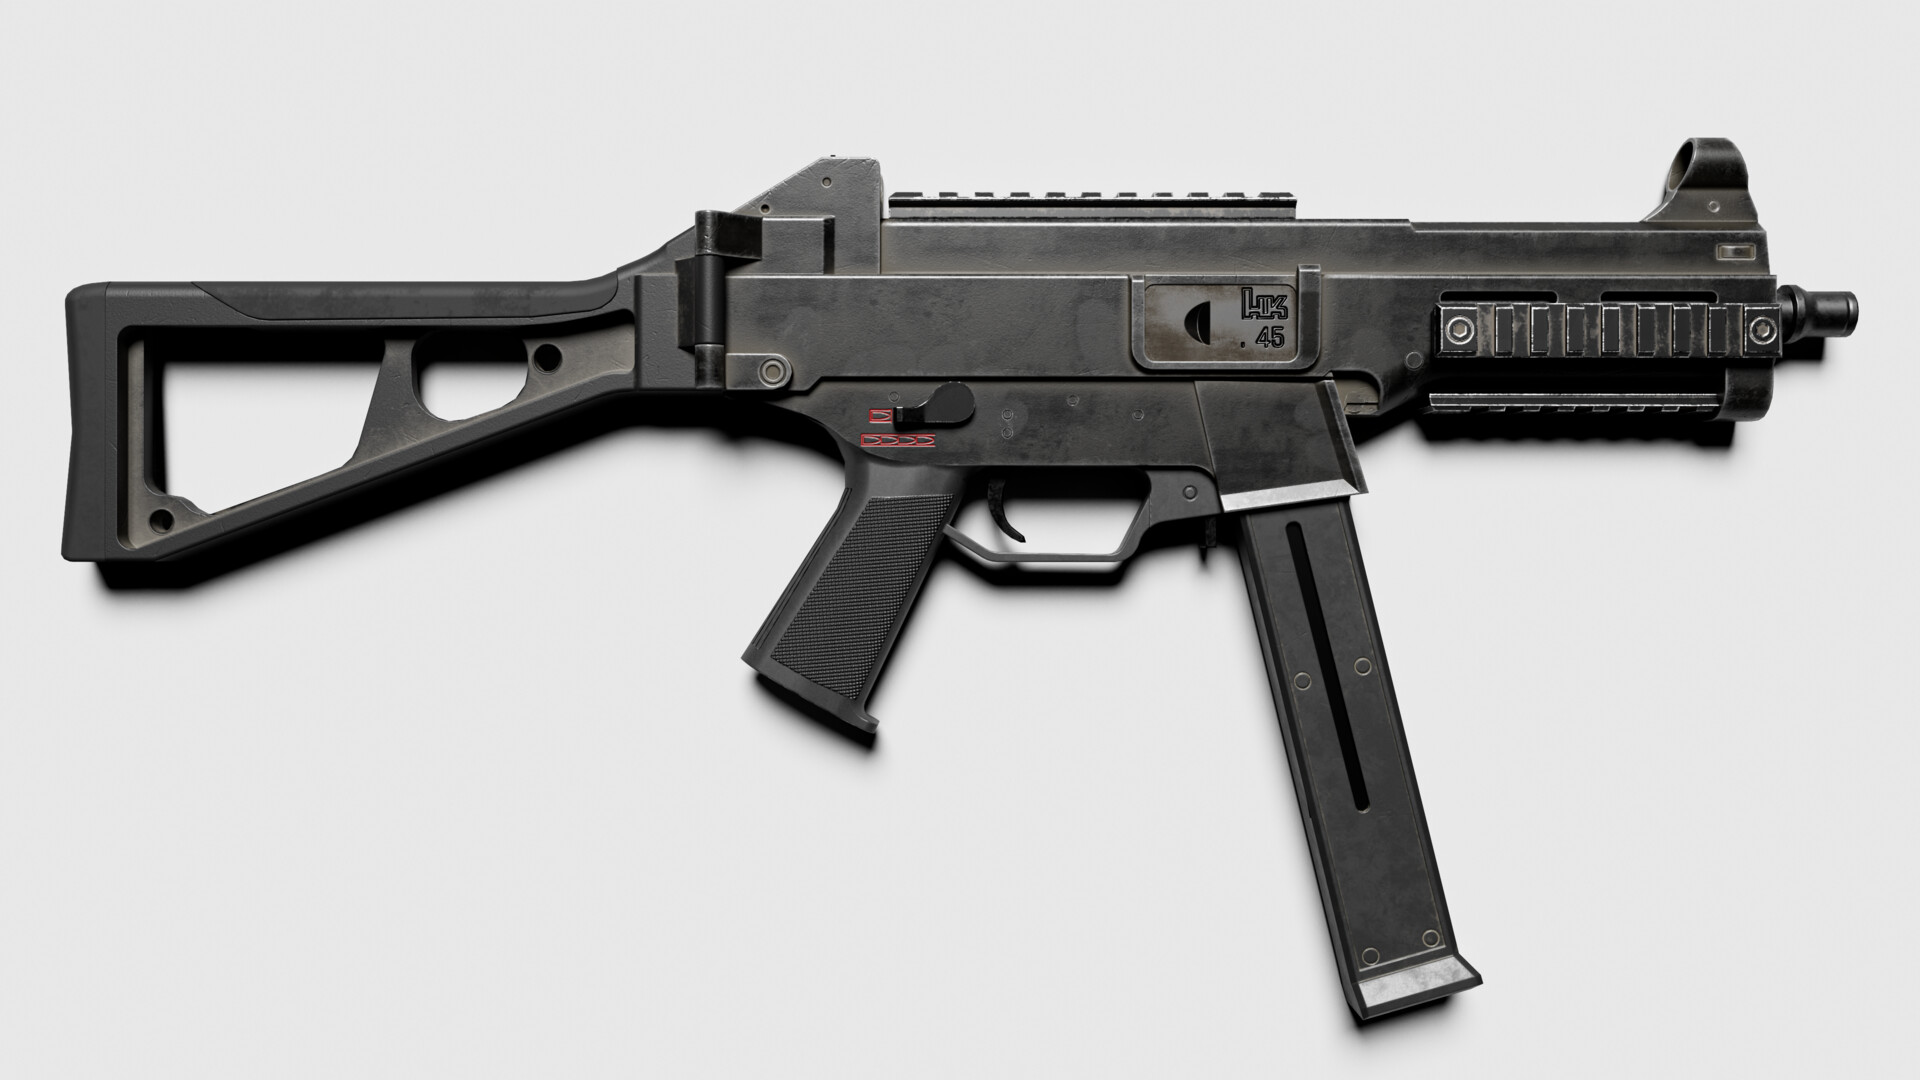 Heckler & Koch UMP: A successor to the famous MP5 - Spec Ops Magazine